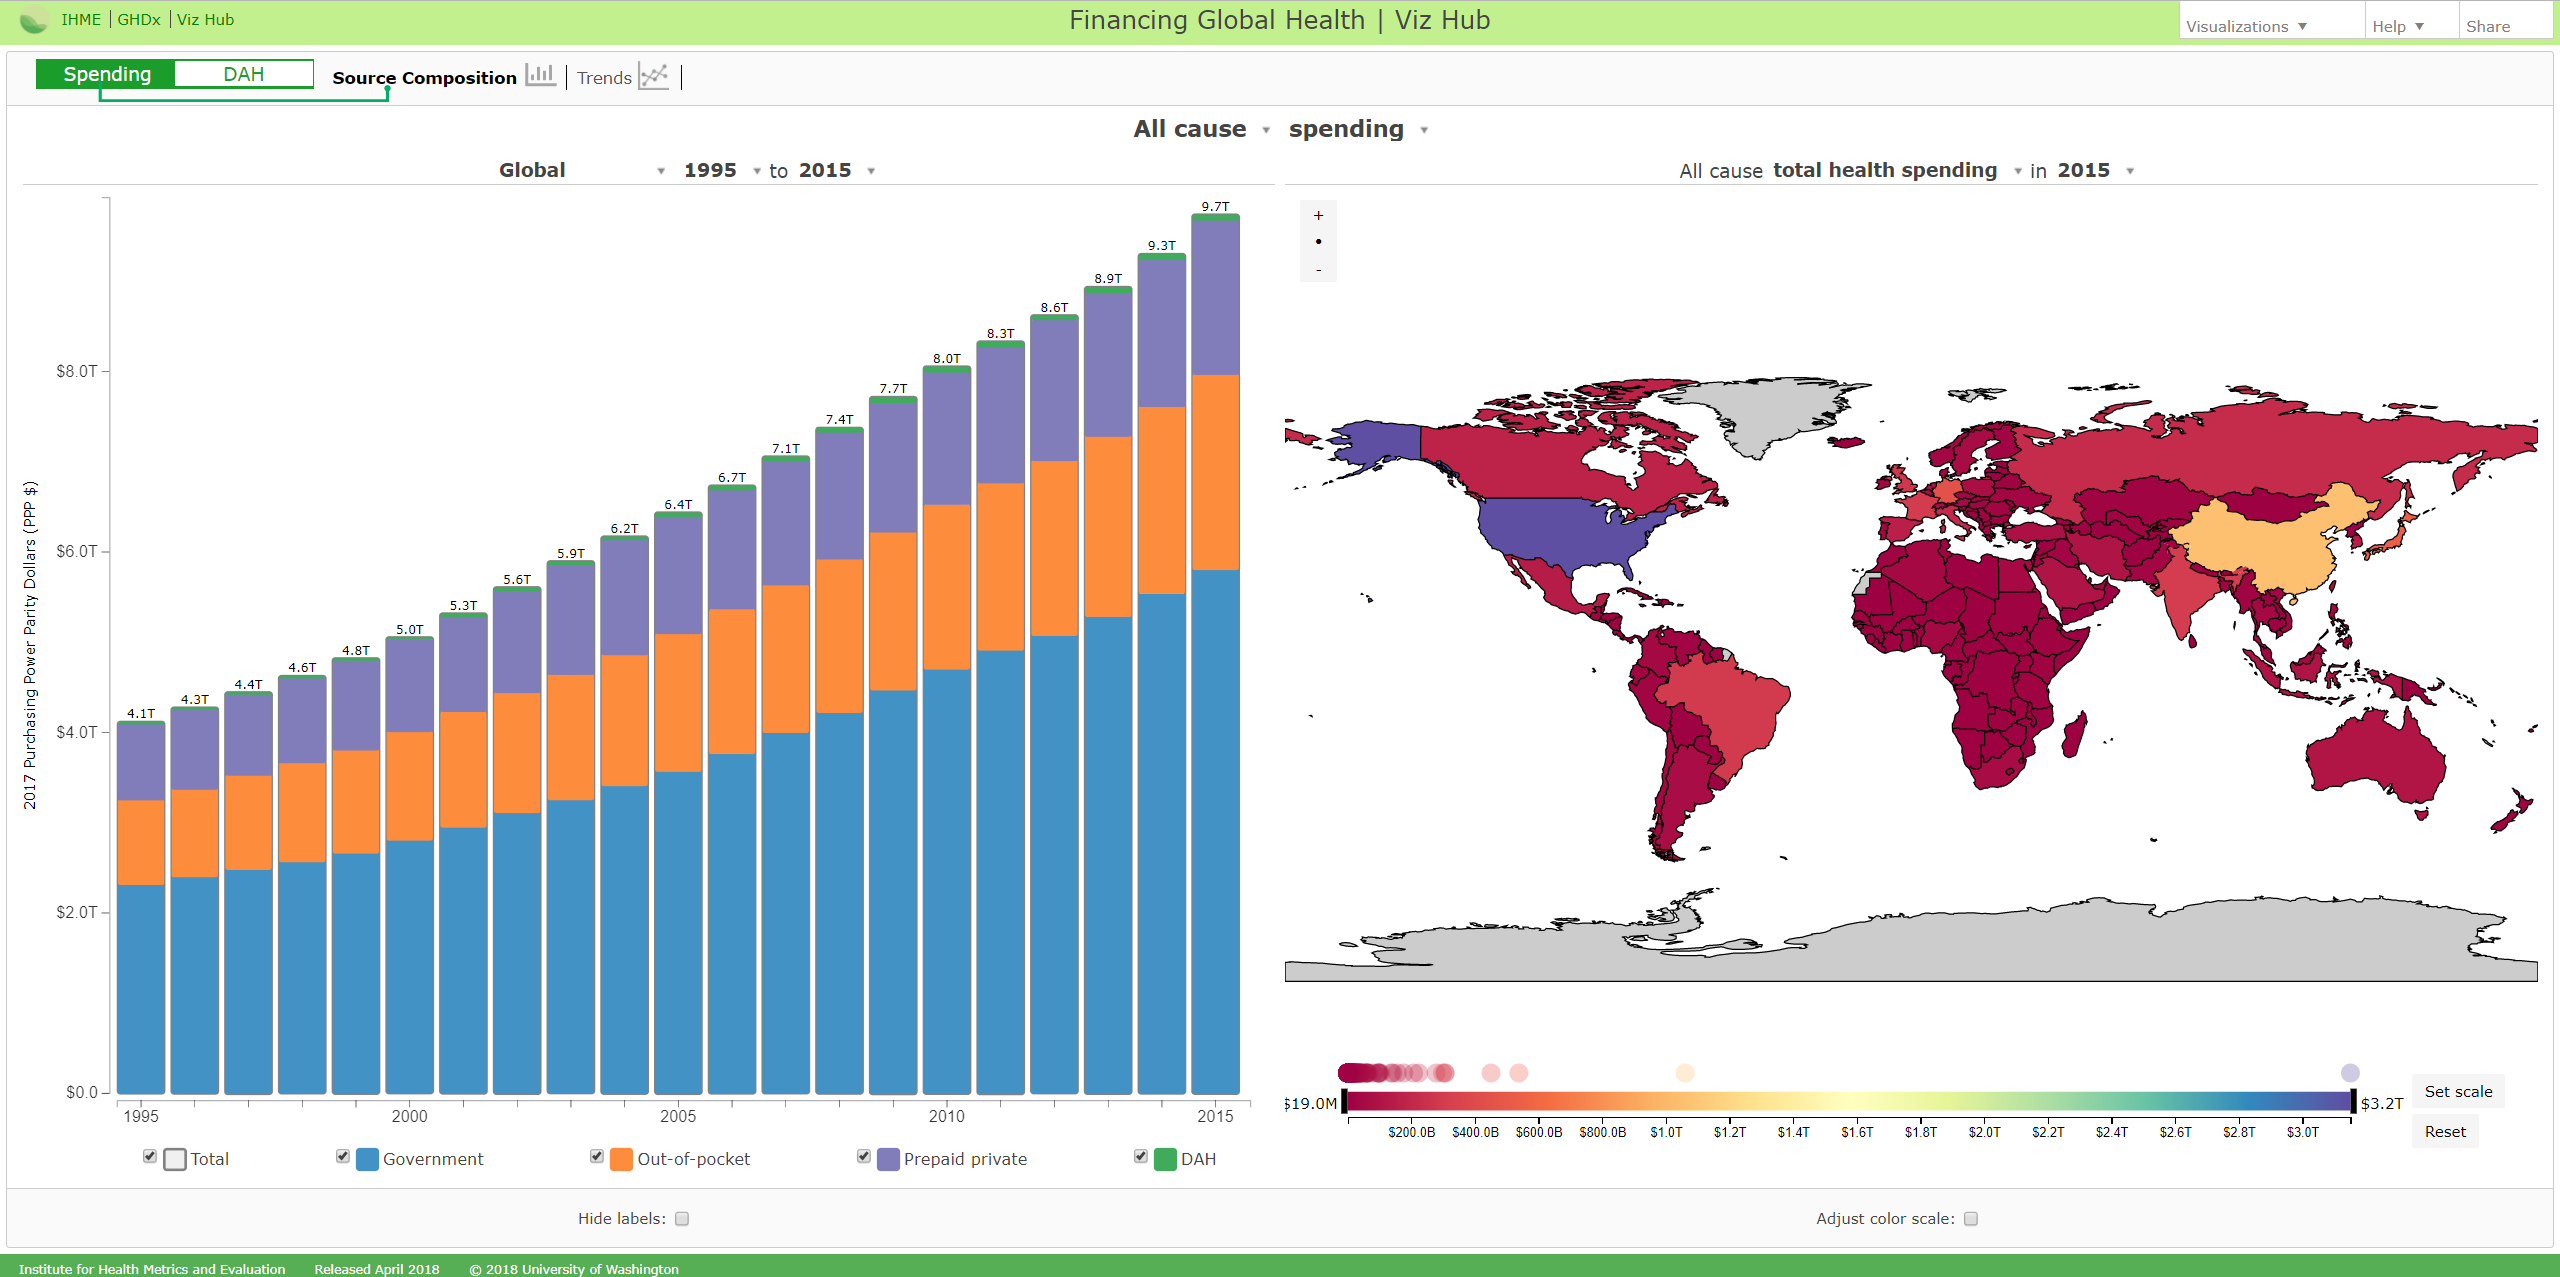 Interact with the Financing Global Health Visualization